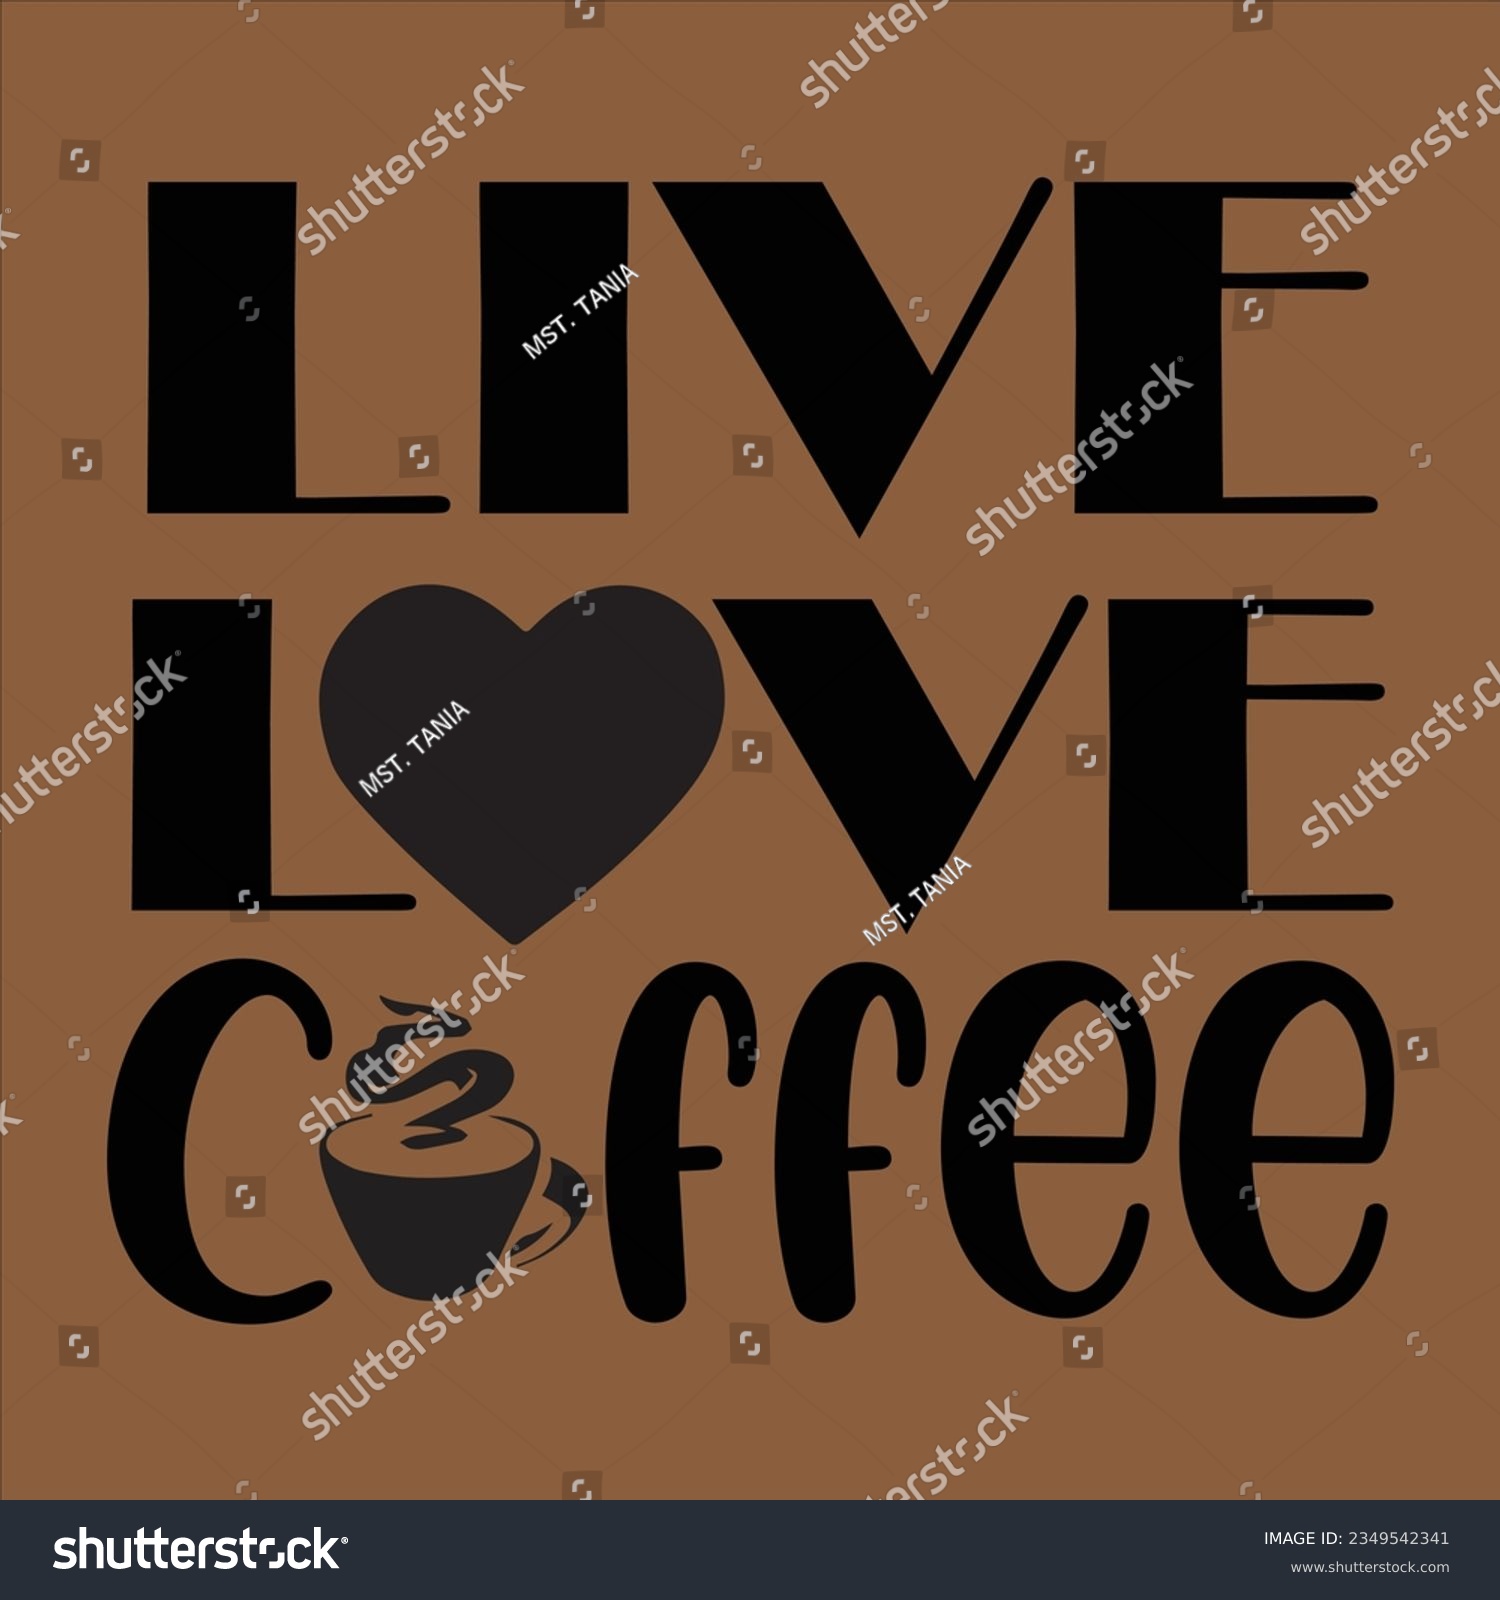 SVG of But first  coffee svg,ok but first iced coffee,1st october international coffee day,international coffee day,last's takea break,live love  coffee,world coffee day , is my favarite design. svg